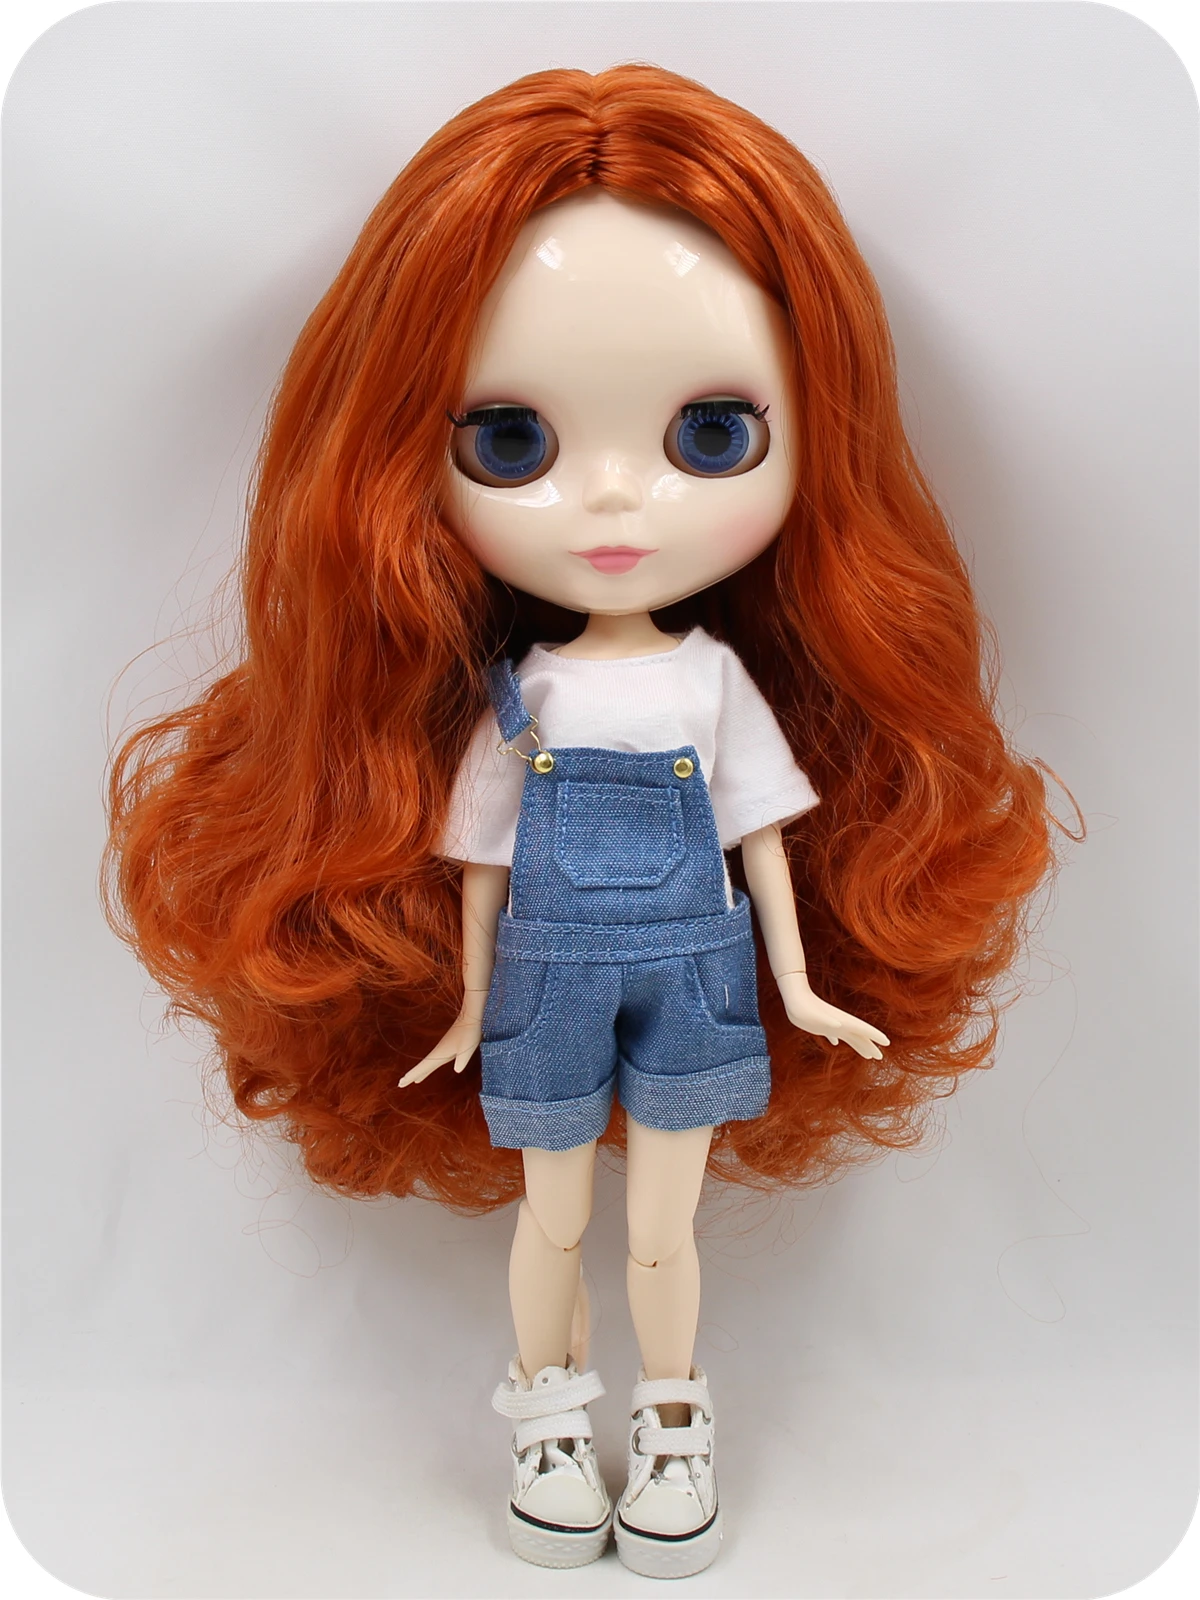 Neo Blythe Doll with Ginger Hair, White Skin, Shiny Cute Face & Custom Jointed Body 1